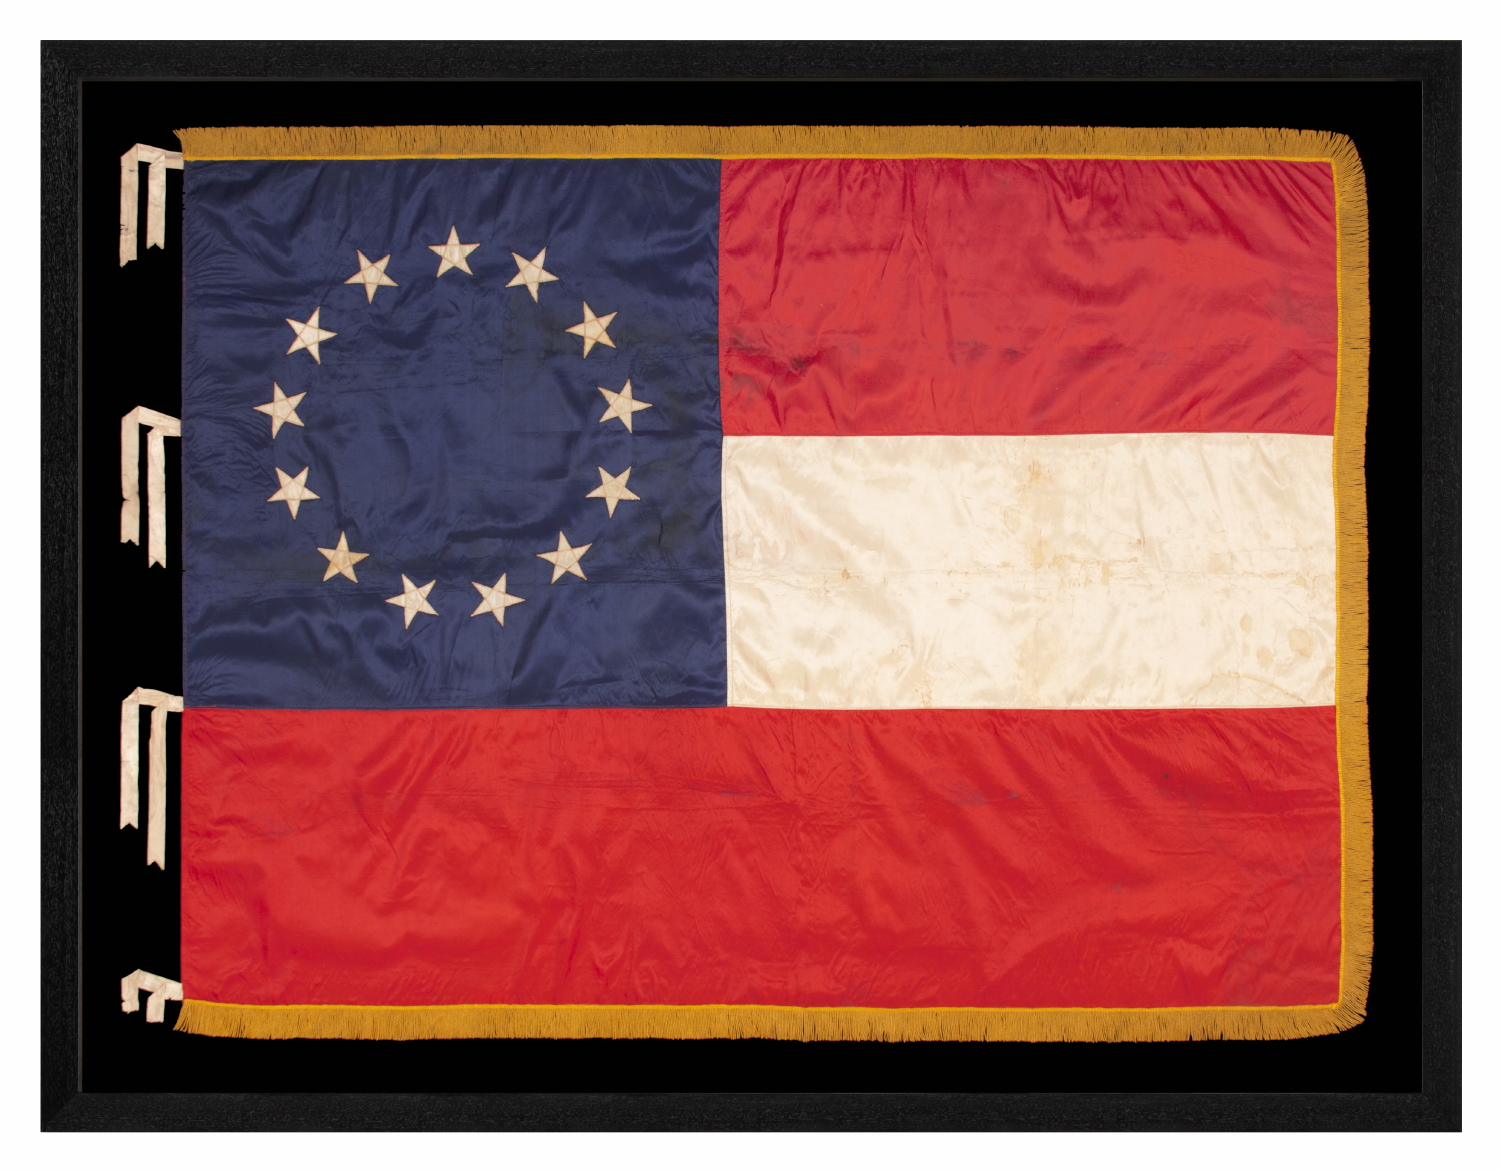 FIRST NATIONAL PATTERN CONFEDERATE FLAG WITH 13 STARS TO INCLUDE MISSOURI AND KENTUCKY SECESSION, MADE ENTIRELY OF SILK, WITH SILK FRINGE AND TIES, A REUNION ERA EXAMPLE, CIRCA 1895-1920